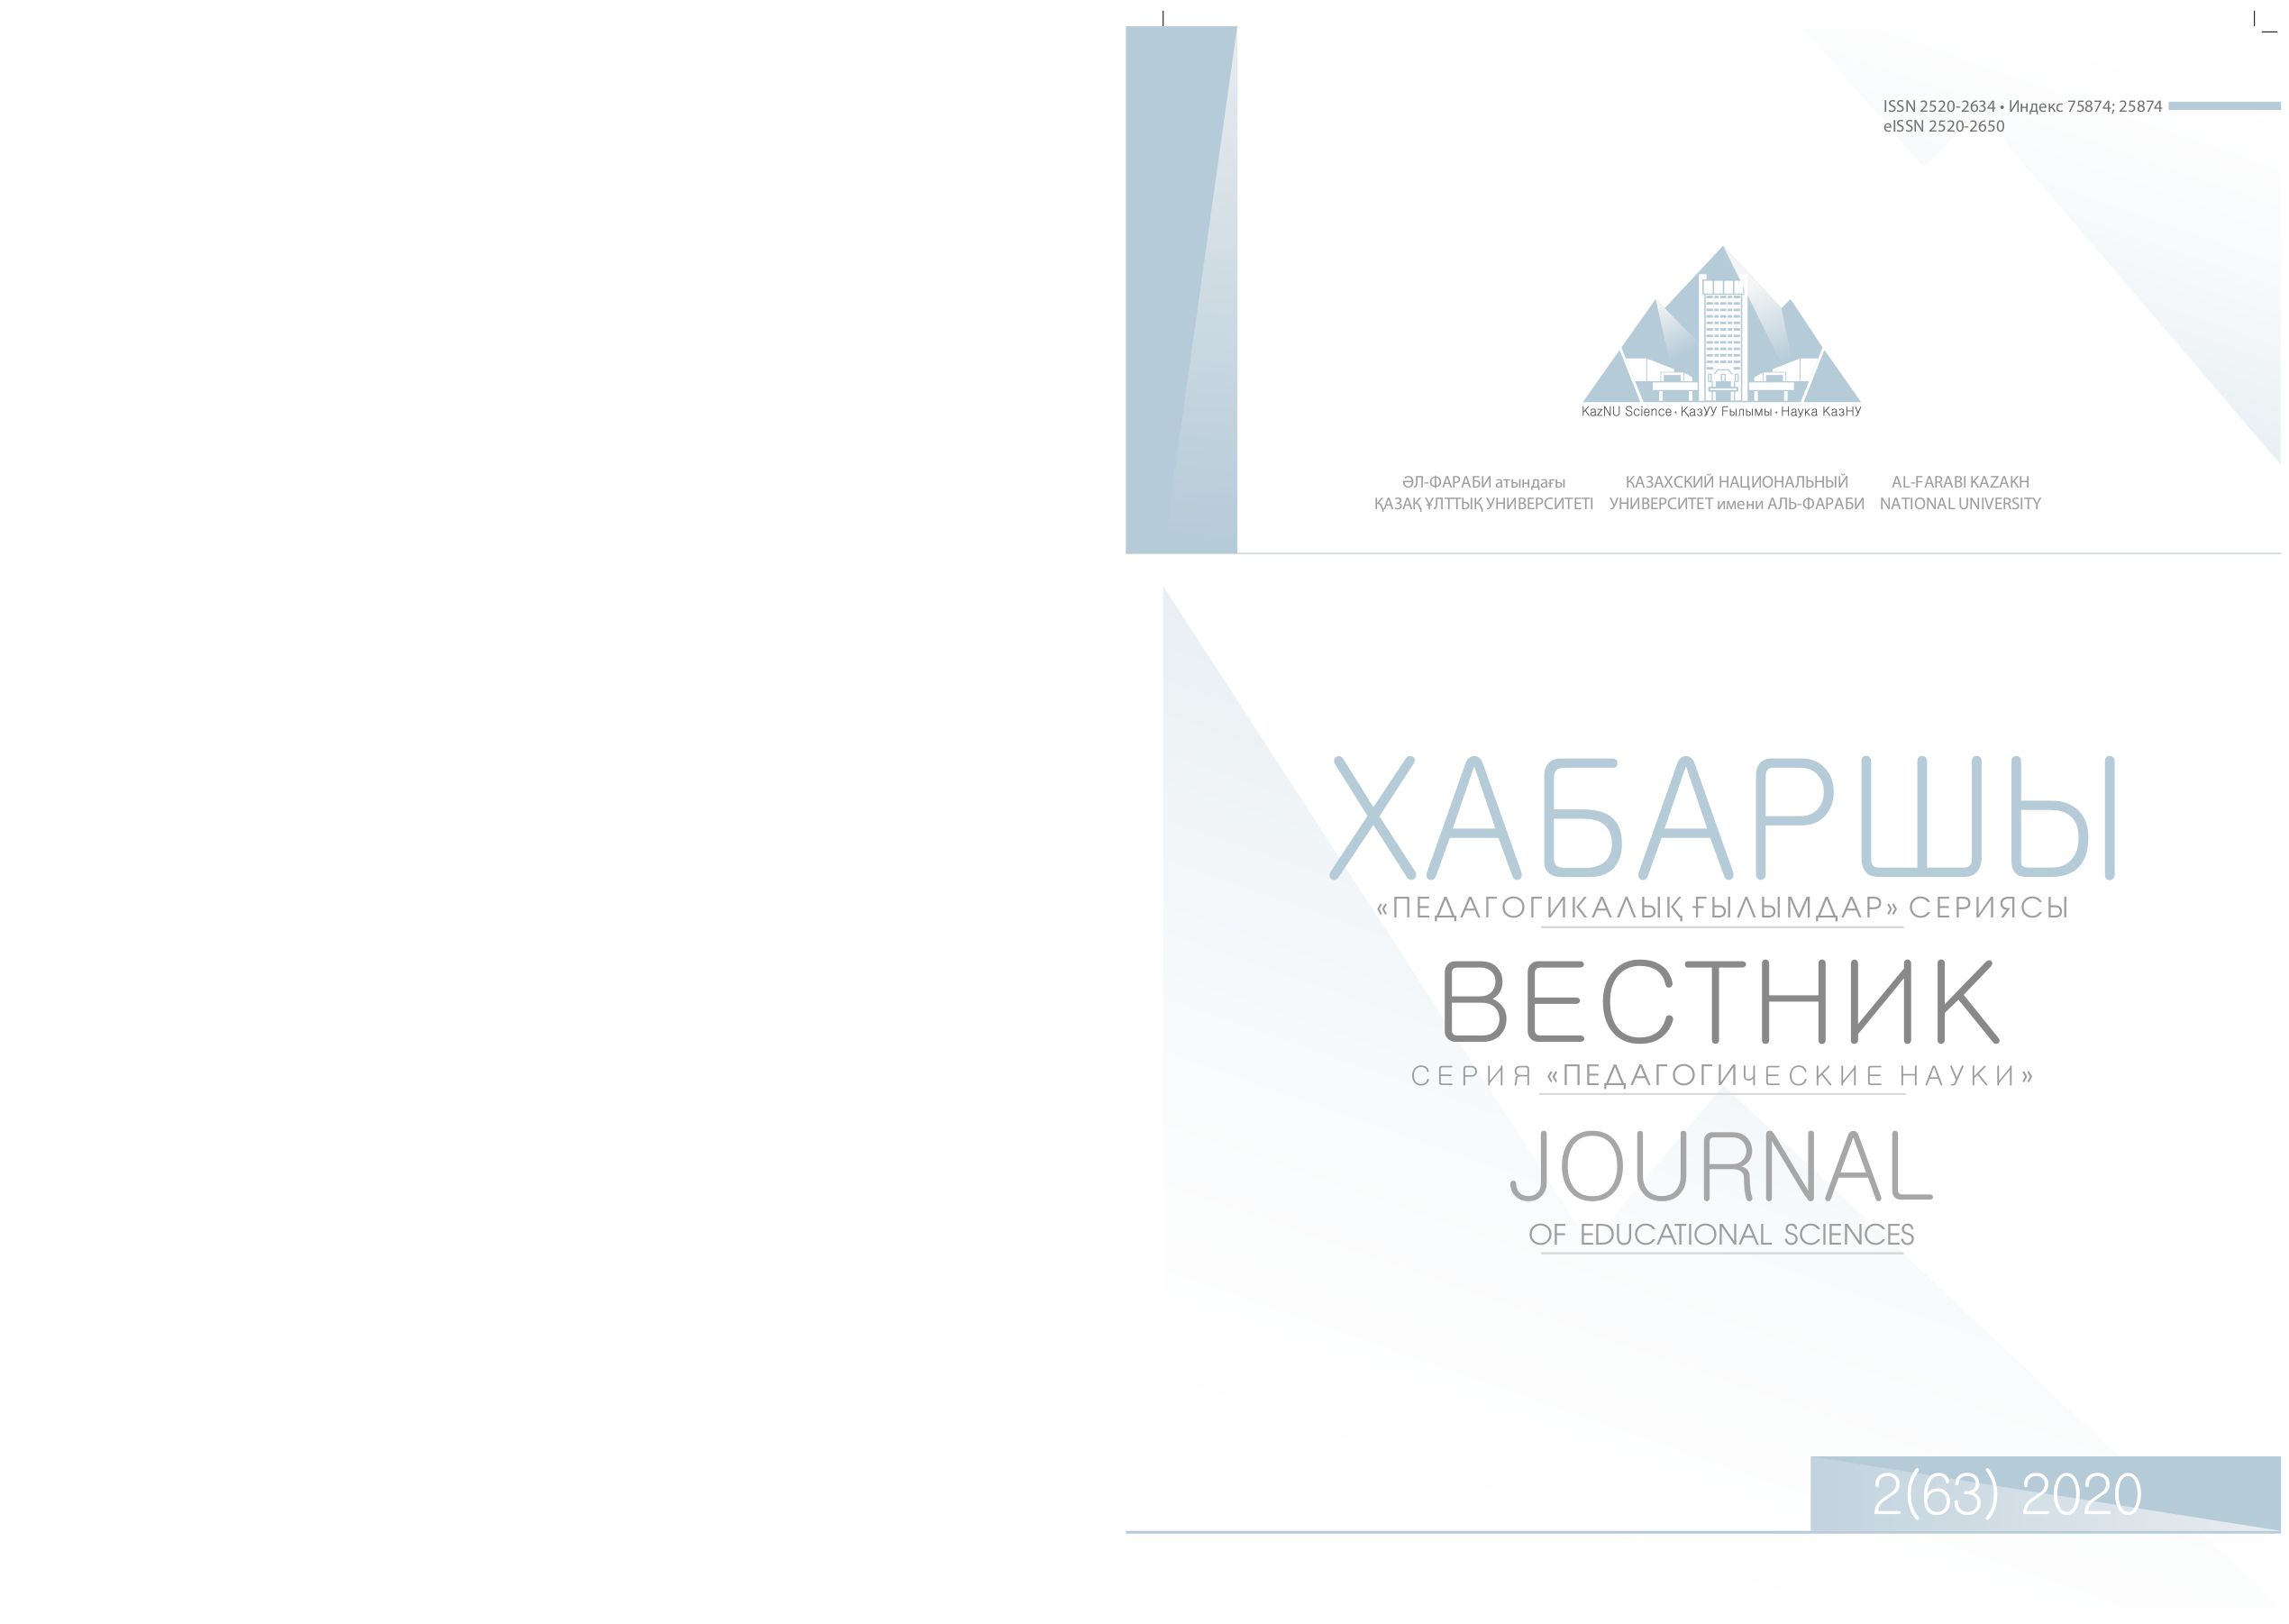 					View Vol. 63 No. 2 (2020): Journal of Educational Sciences
				